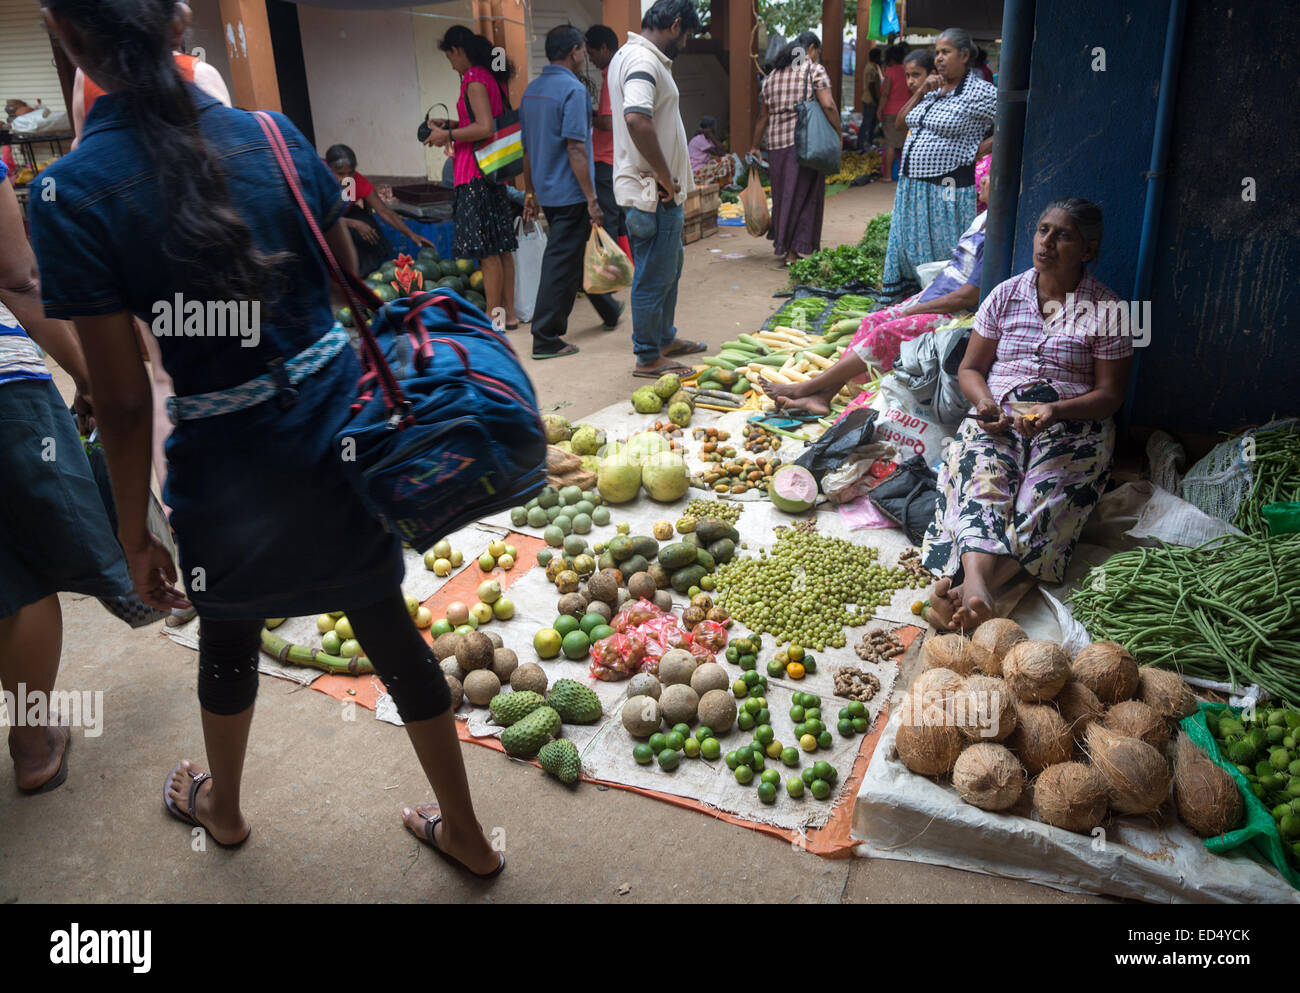 Vegetable vendor in the market on December 17, 2014 in Tangalle, Southern Province, Sri Lanka, Asia. Stock Photo